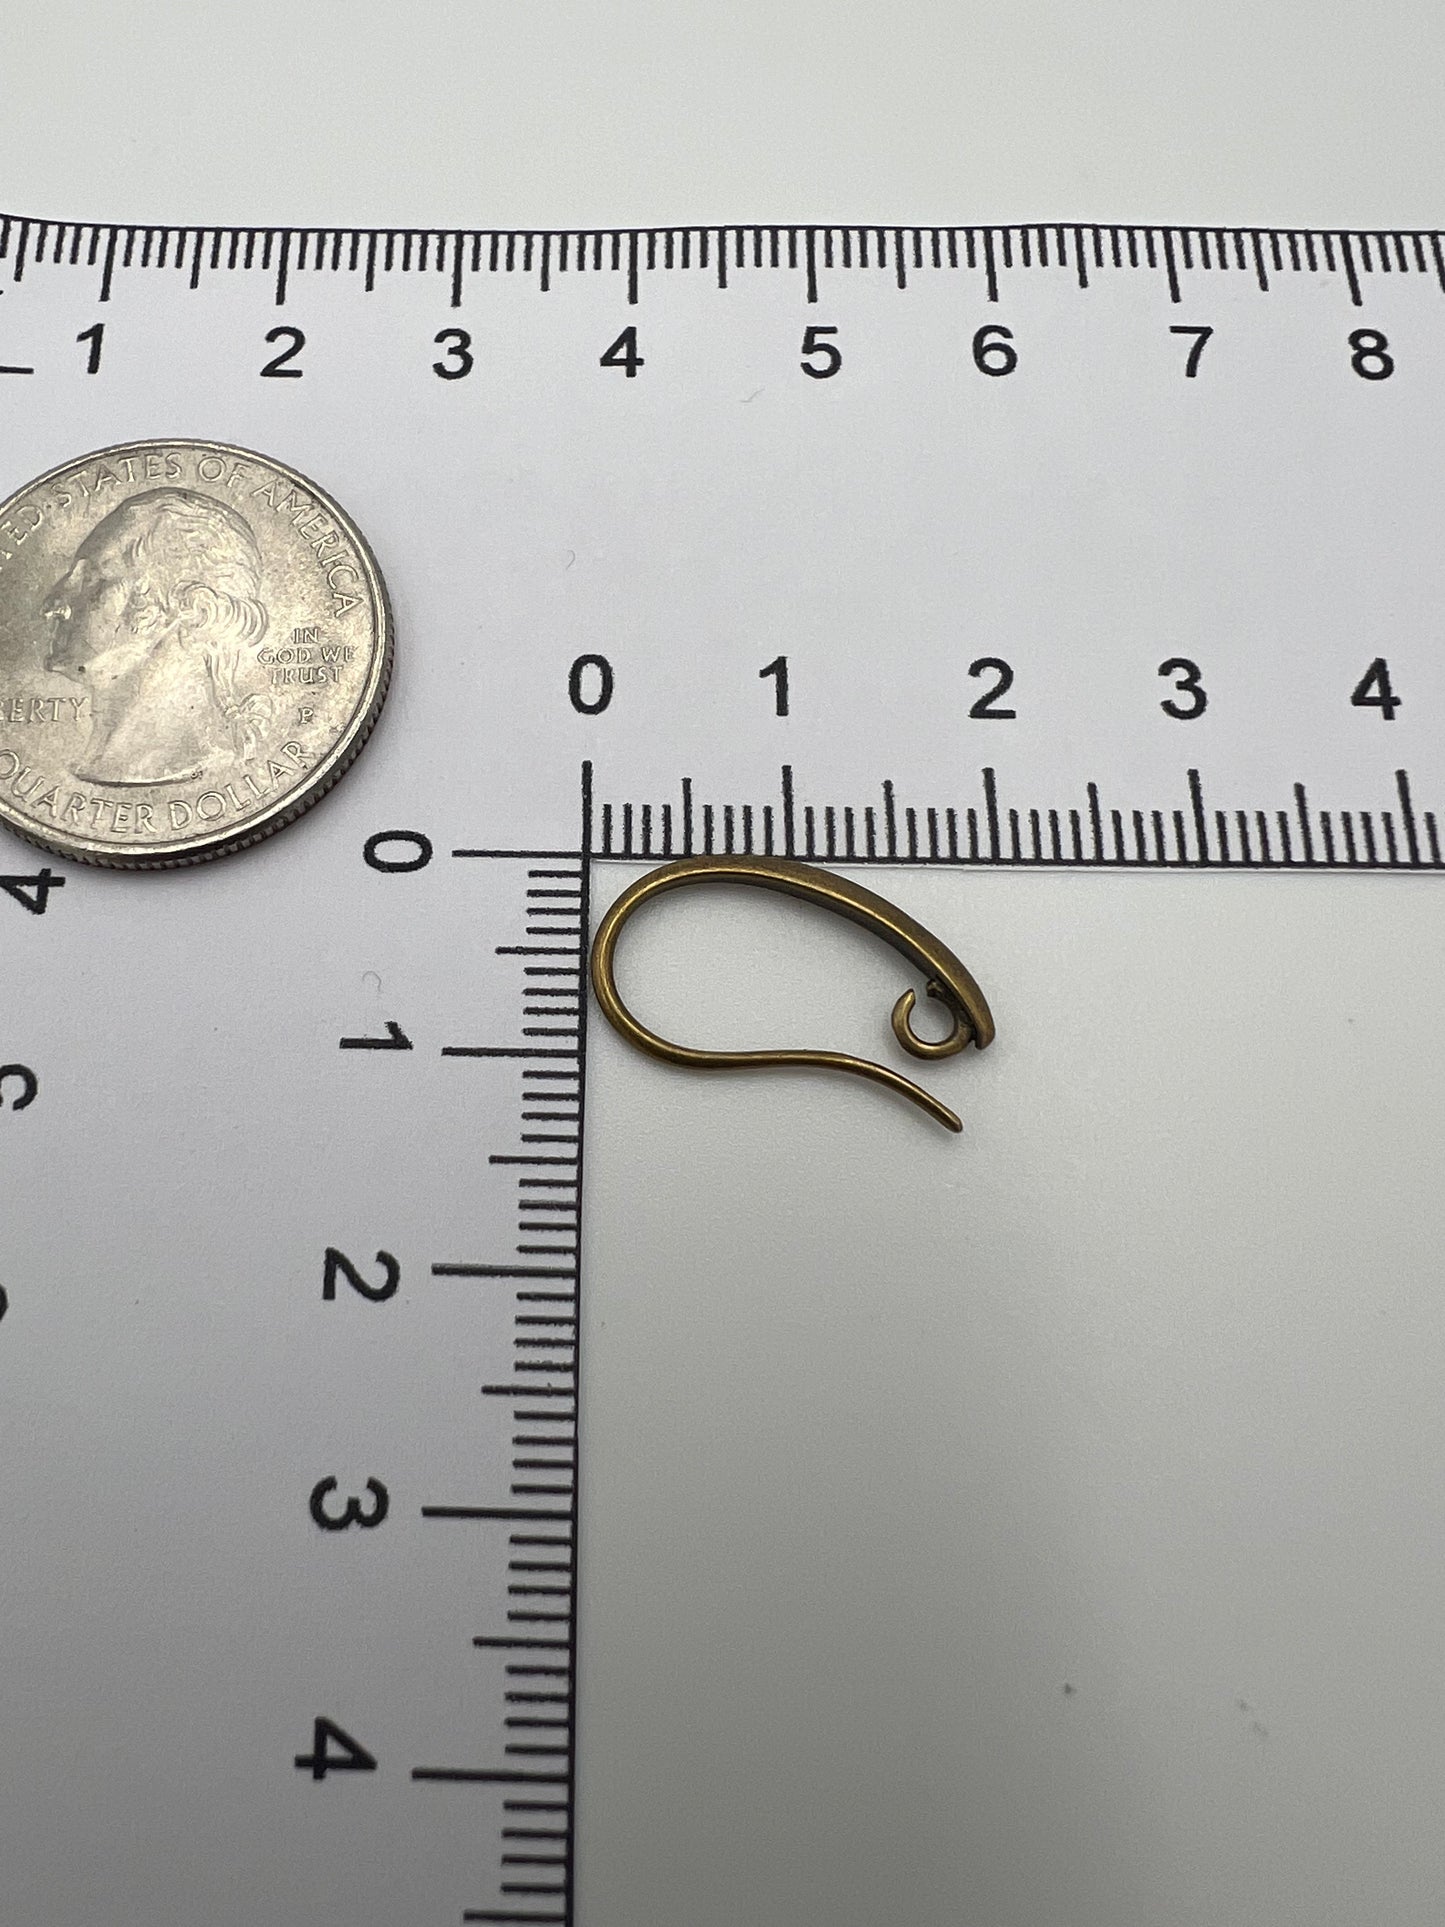 19x11mm Antique Brass Earwire, 2mm Open Ring 36 Pack